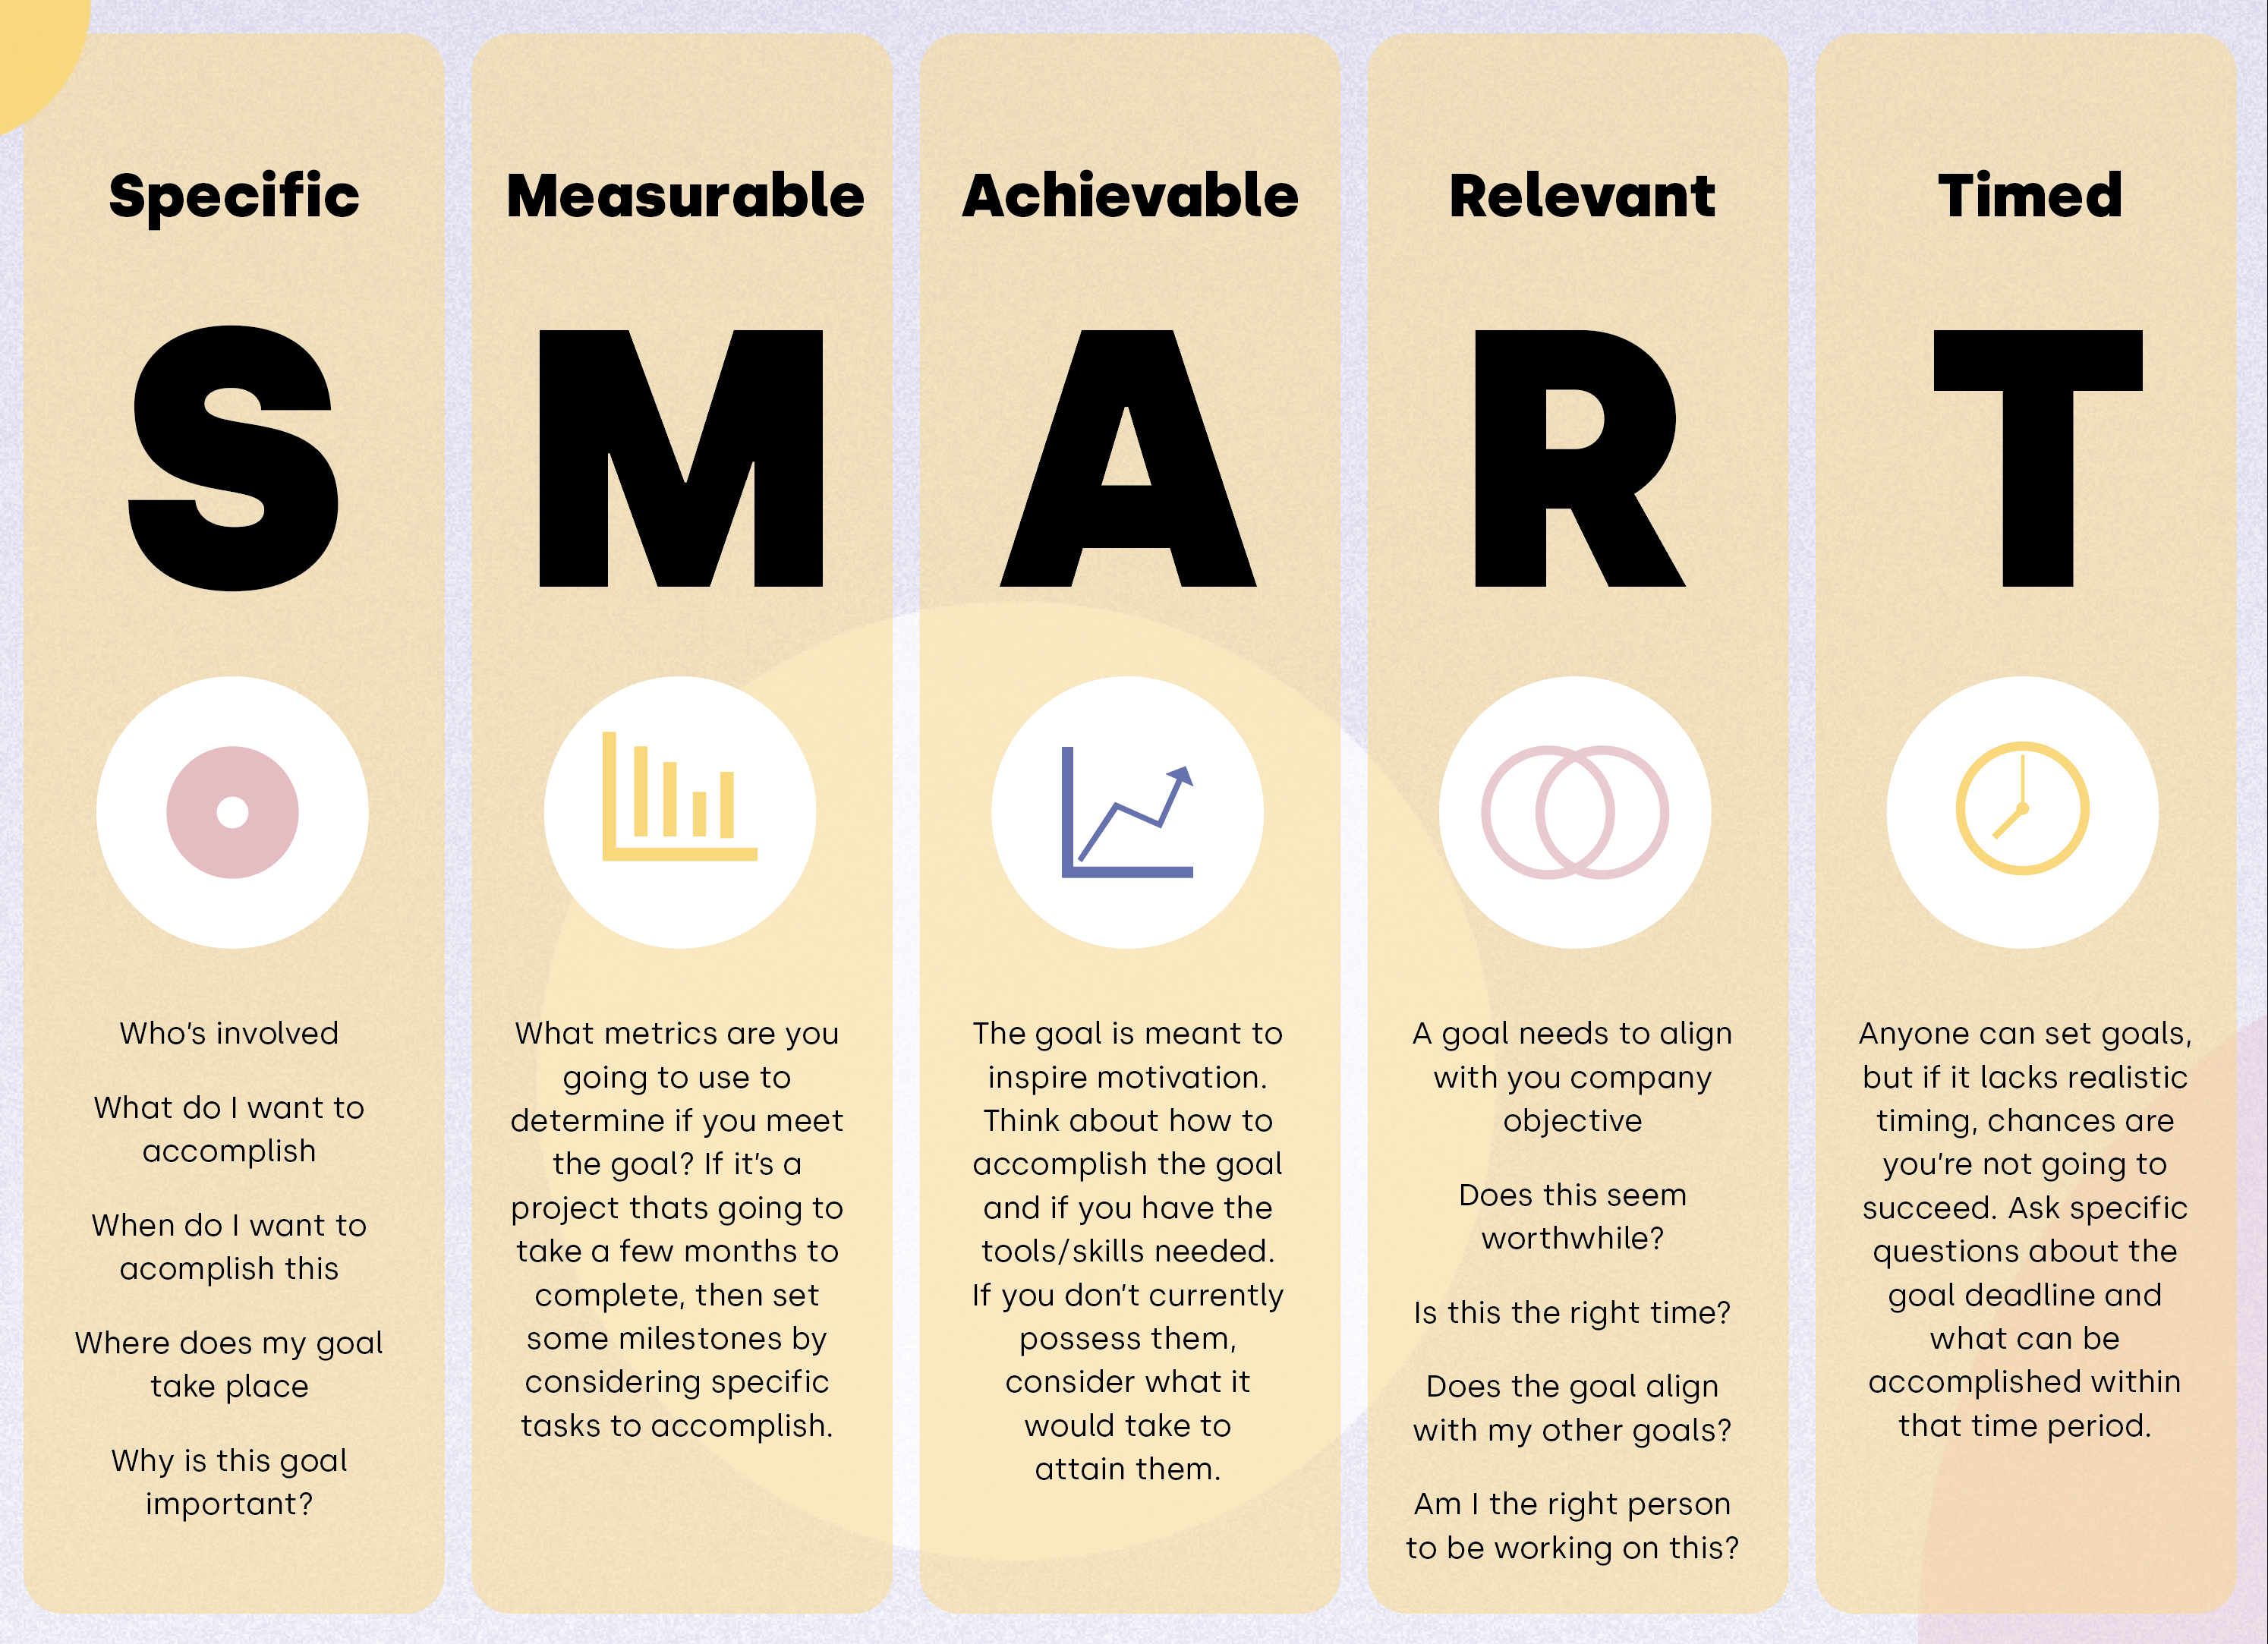 Smart goals and how to attain them